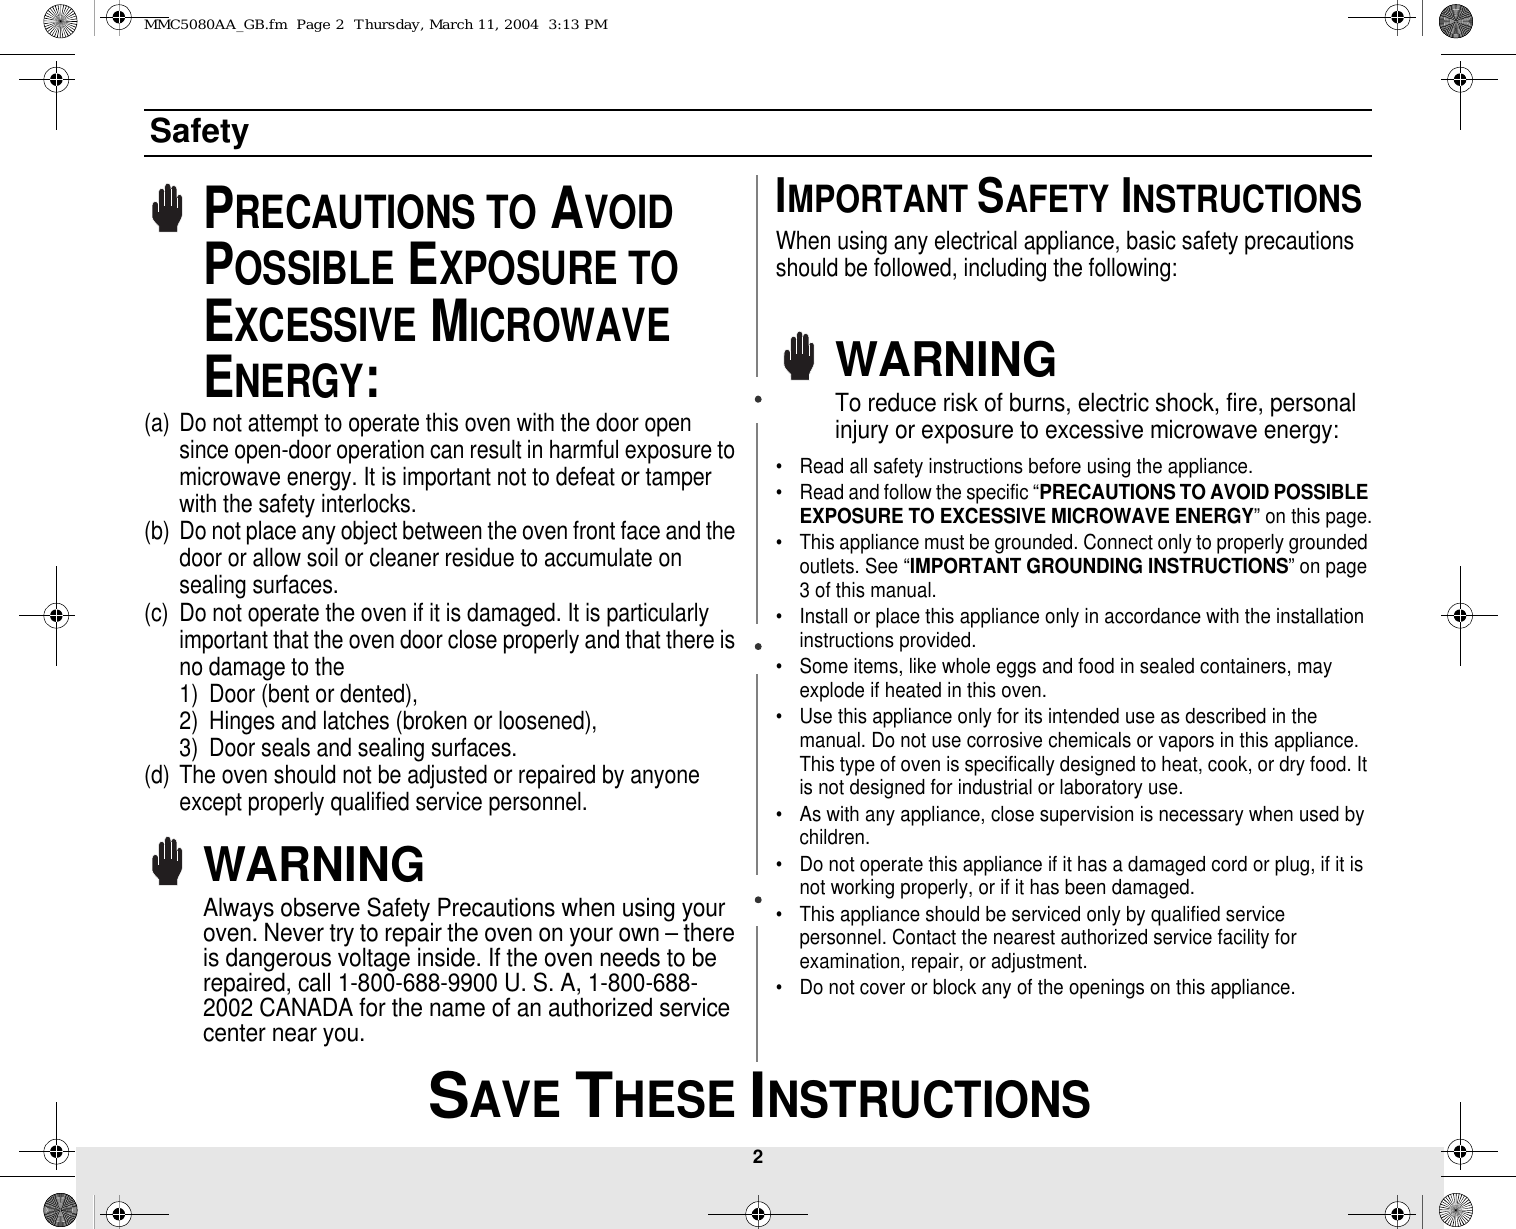 2 SAVE THESE INSTRUCTIONSSafetyPRECAUTIONS TO AVOID POSSIBLE EXPOSURE TO EXCESSIVE MICROWAVE ENERGY:(a) Do not attempt to operate this oven with the door open since open-door operation can result in harmful exposure to microwave energy. It is important not to defeat or tamper with the safety interlocks.(b) Do not place any object between the oven front face and the door or allow soil or cleaner residue to accumulate on sealing surfaces.(c) Do not operate the oven if it is damaged. It is particularly important that the oven door close properly and that there is no damage to the 1) Door (bent or dented), 2) Hinges and latches (broken or loosened), 3) Door seals and sealing surfaces.(d) The oven should not be adjusted or repaired by anyone except properly qualified service personnel.WARNINGAlways observe Safety Precautions when using your oven. Never try to repair the oven on your own – there is dangerous voltage inside. If the oven needs to be repaired, call 1-800-688-9900 U. S. A, 1-800-688-2002 CANADA for the name of an authorized service center near you.IMPORTANT SAFETY INSTRUCTIONSWhen using any electrical appliance, basic safety precautions should be followed, including the following:WARNINGTo reduce risk of burns, electric shock, fire, personal injury or exposure to excessive microwave energy:• Read all safety instructions before using the appliance.• Read and follow the specific “PRECAUTIONS TO AVOID POSSIBLE EXPOSURE TO EXCESSIVE MICROWAVE ENERGY” on this page.• This appliance must be grounded. Connect only to properly grounded outlets. See “IMPORTANT GROUNDING INSTRUCTIONS” on page 3 of this manual. • Install or place this appliance only in accordance with the installation instructions provided.• Some items, like whole eggs and food in sealed containers, may explode if heated in this oven.• Use this appliance only for its intended use as described in the manual. Do not use corrosive chemicals or vapors in this appliance. This type of oven is specifically designed to heat, cook, or dry food. It is not designed for industrial or laboratory use.• As with any appliance, close supervision is necessary when used by children.• Do not operate this appliance if it has a damaged cord or plug, if it is not working properly, or if it has been damaged.• This appliance should be serviced only by qualified service personnel. Contact the nearest authorized service facility for examination, repair, or adjustment.• Do not cover or block any of the openings on this appliance.MMC5080AA_GB.fm  Page 2  Thursday, March 11, 2004  3:13 PM